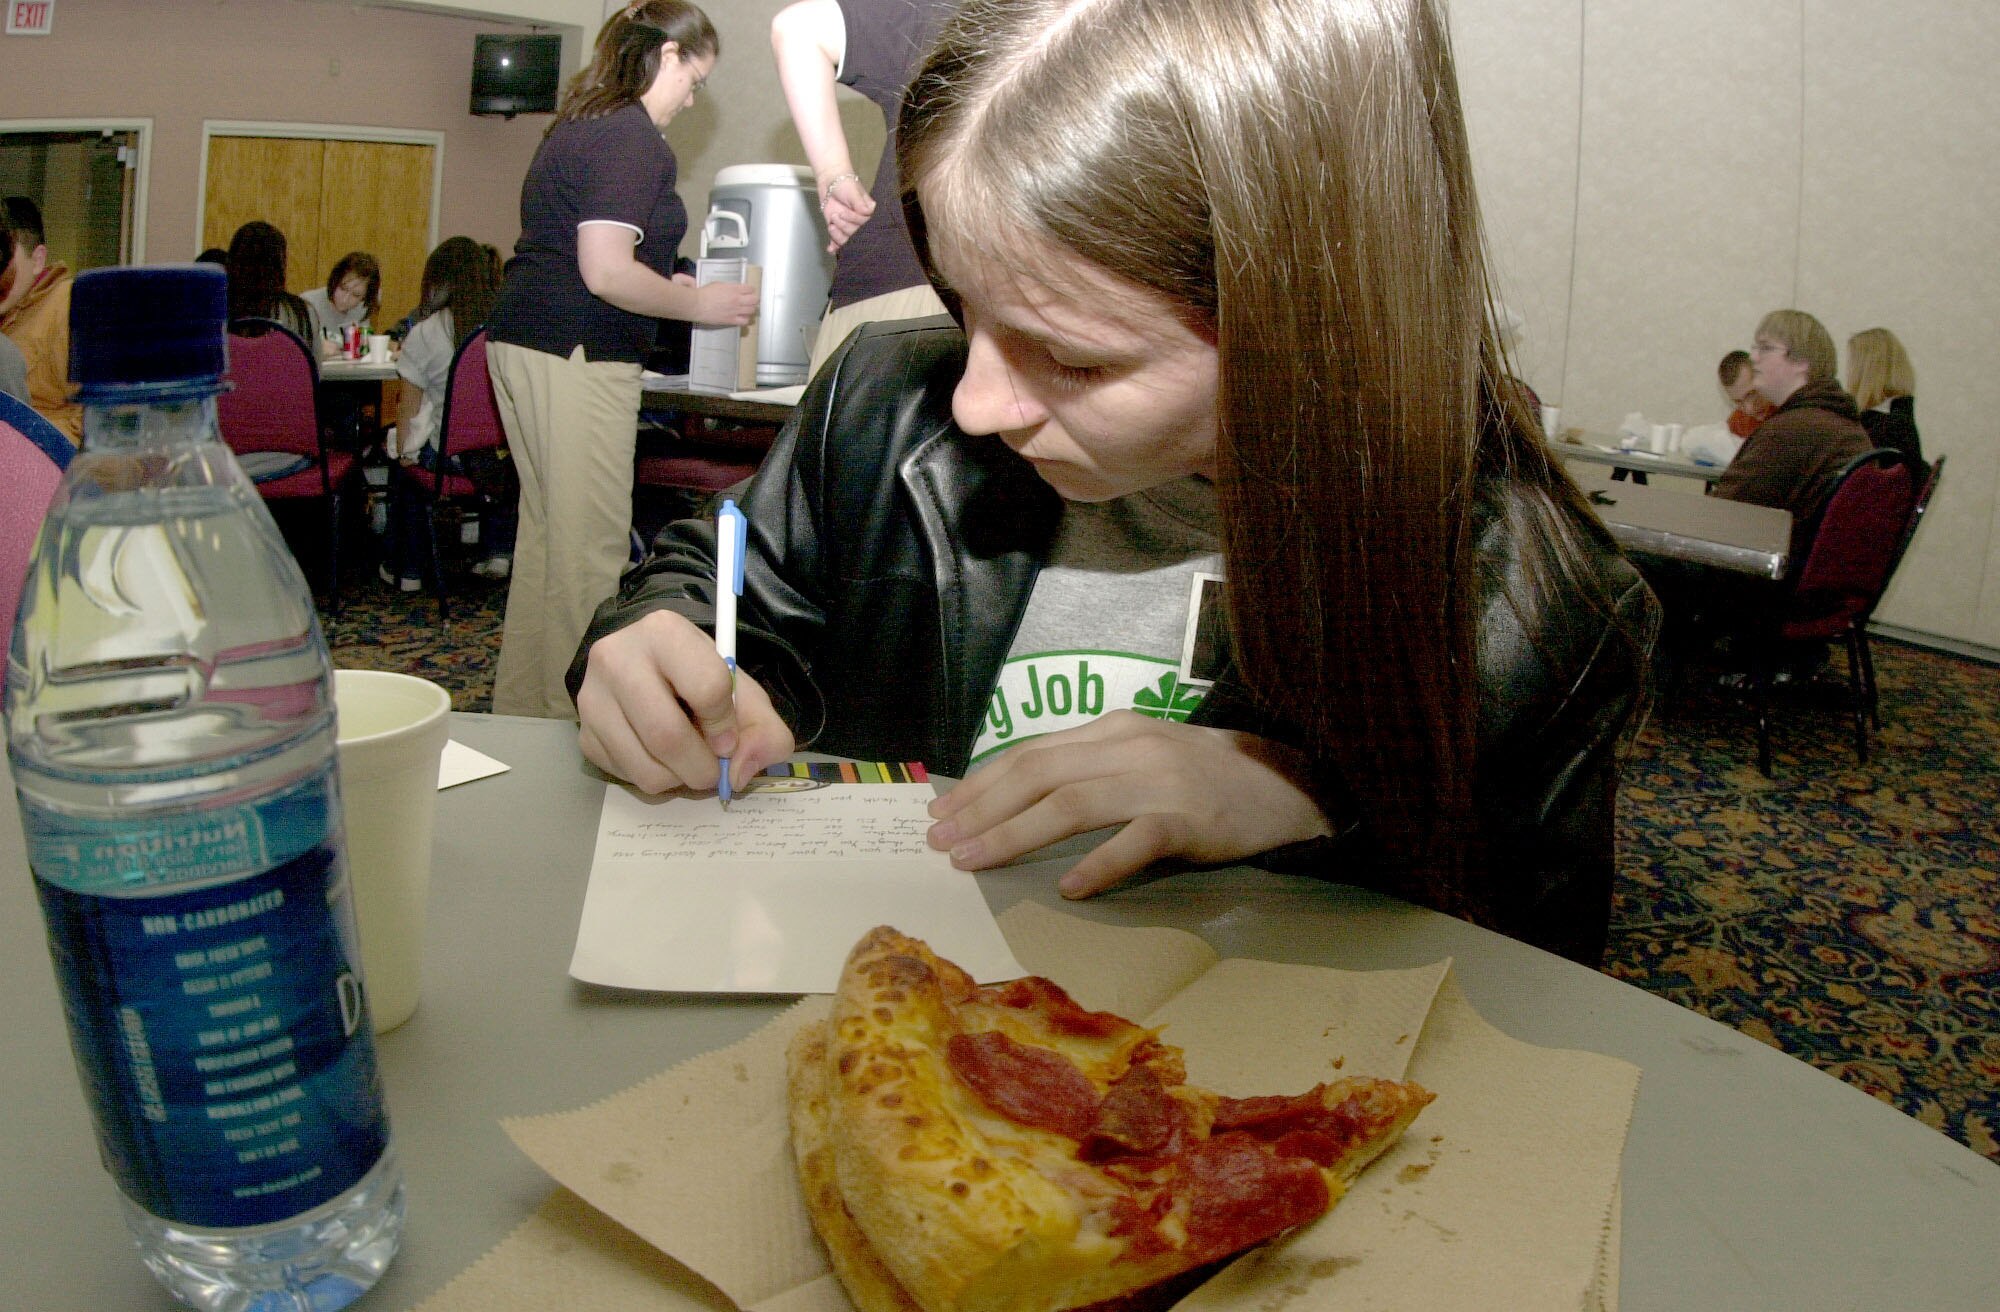 Ashlee Knopp, a freshman from Lakeview High School, writes a “Thank you” note to her job mentor during lunch. (U.S. Air Force photo by Airman 1st Class Luis Loza Gutierrez)